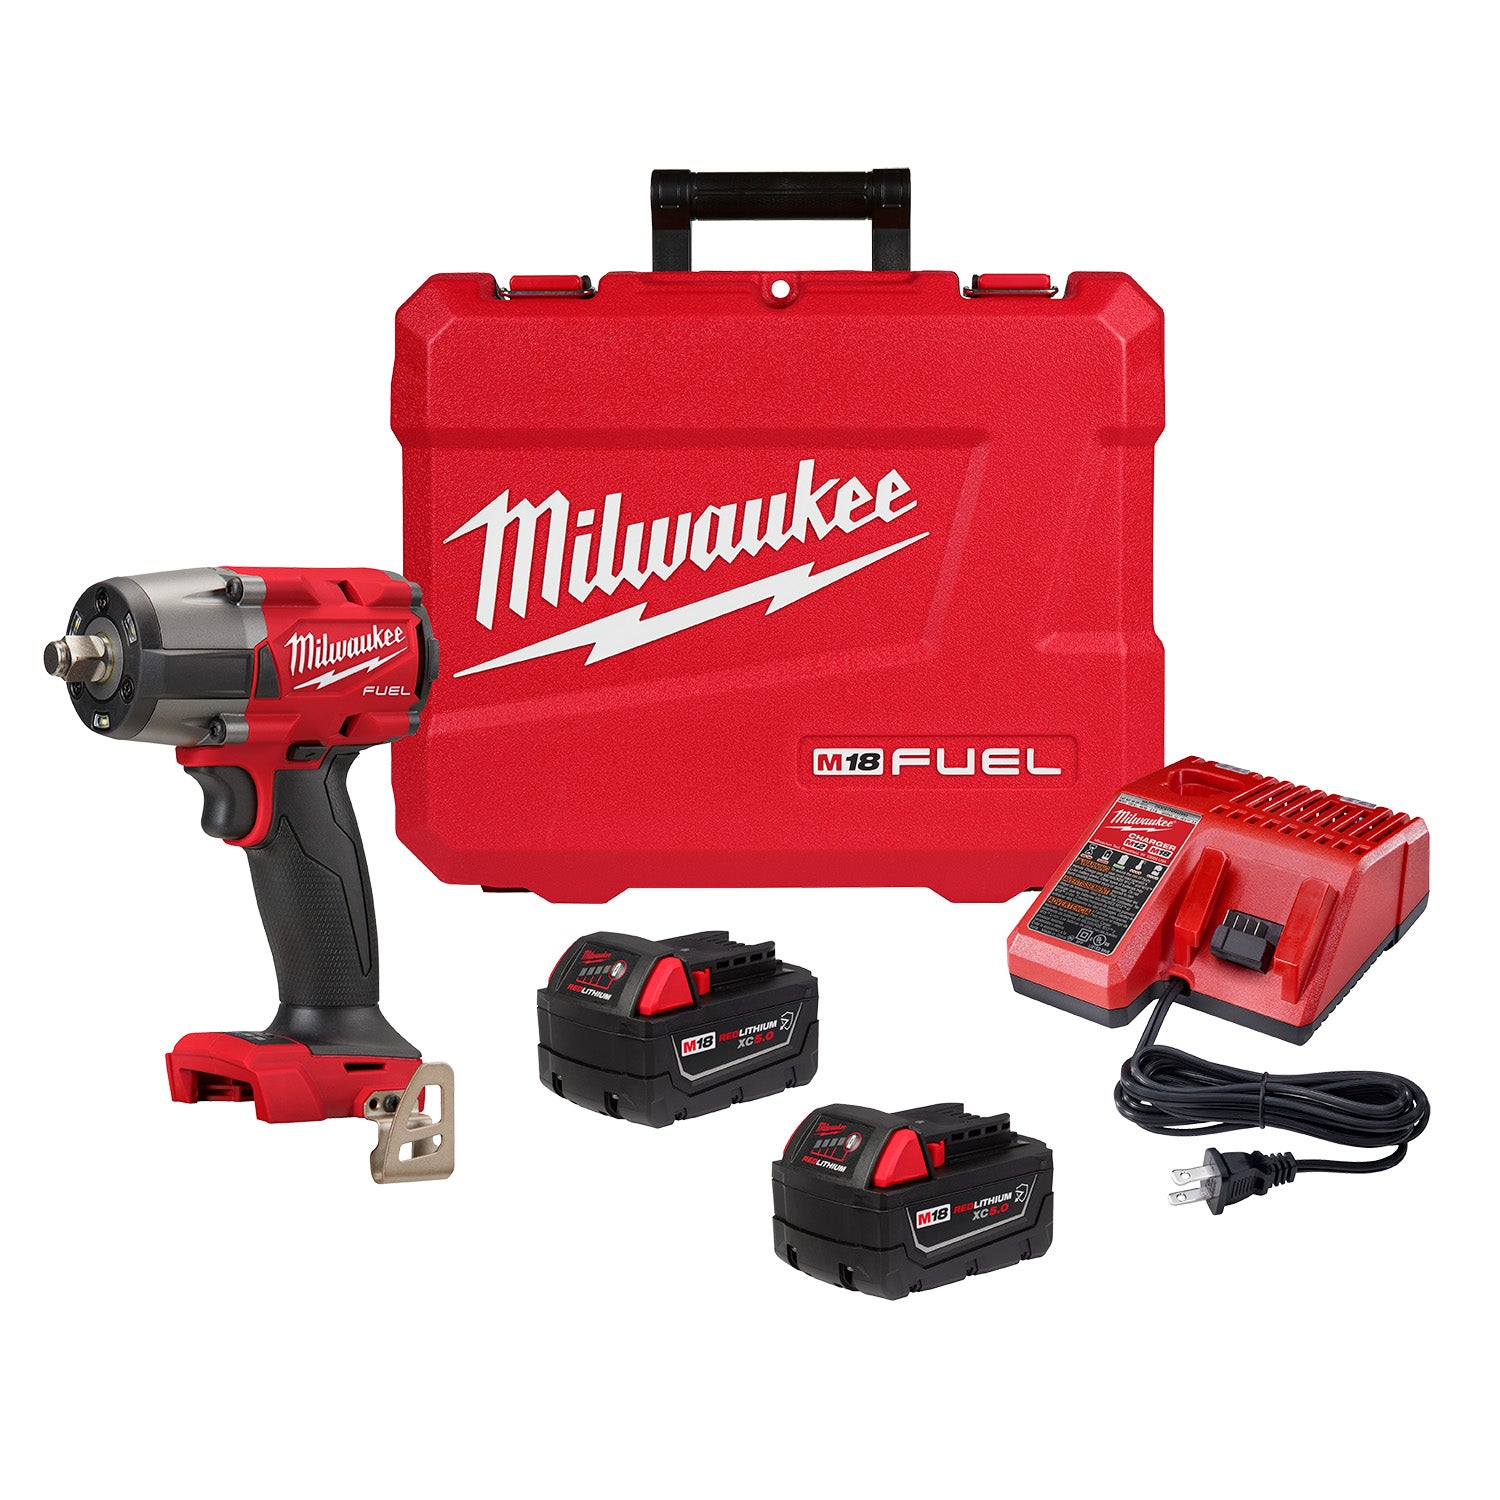 Milwaukee 2962-22R - M18 FUEL™ 1/2 " Compact Impact Wrench w/ Pin Detent Kit